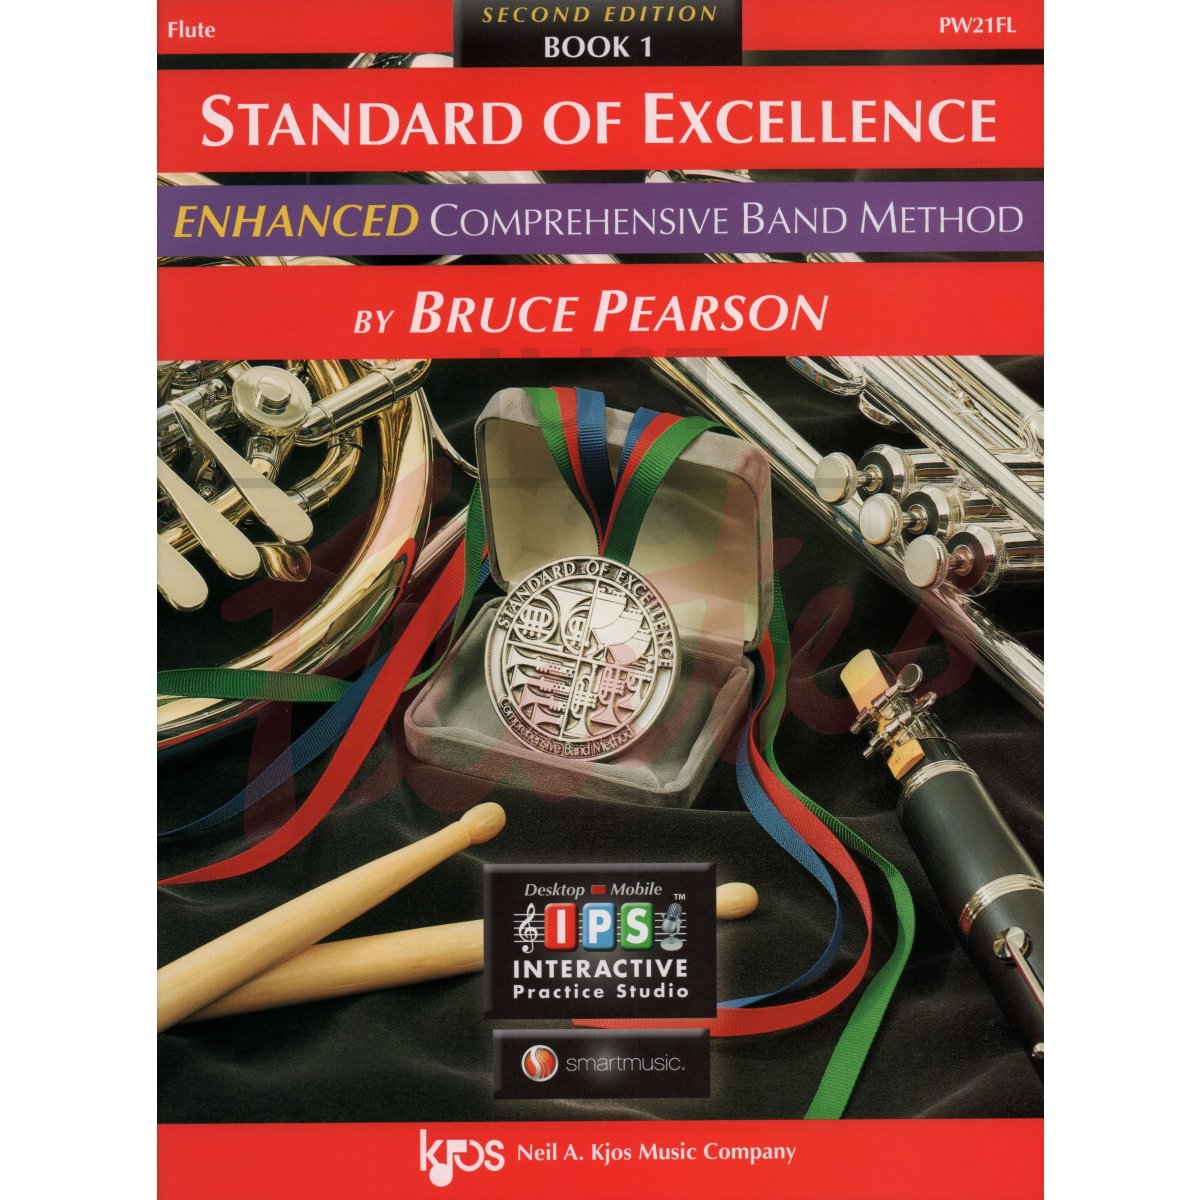 Standard of Excellence for Flute, Book 1